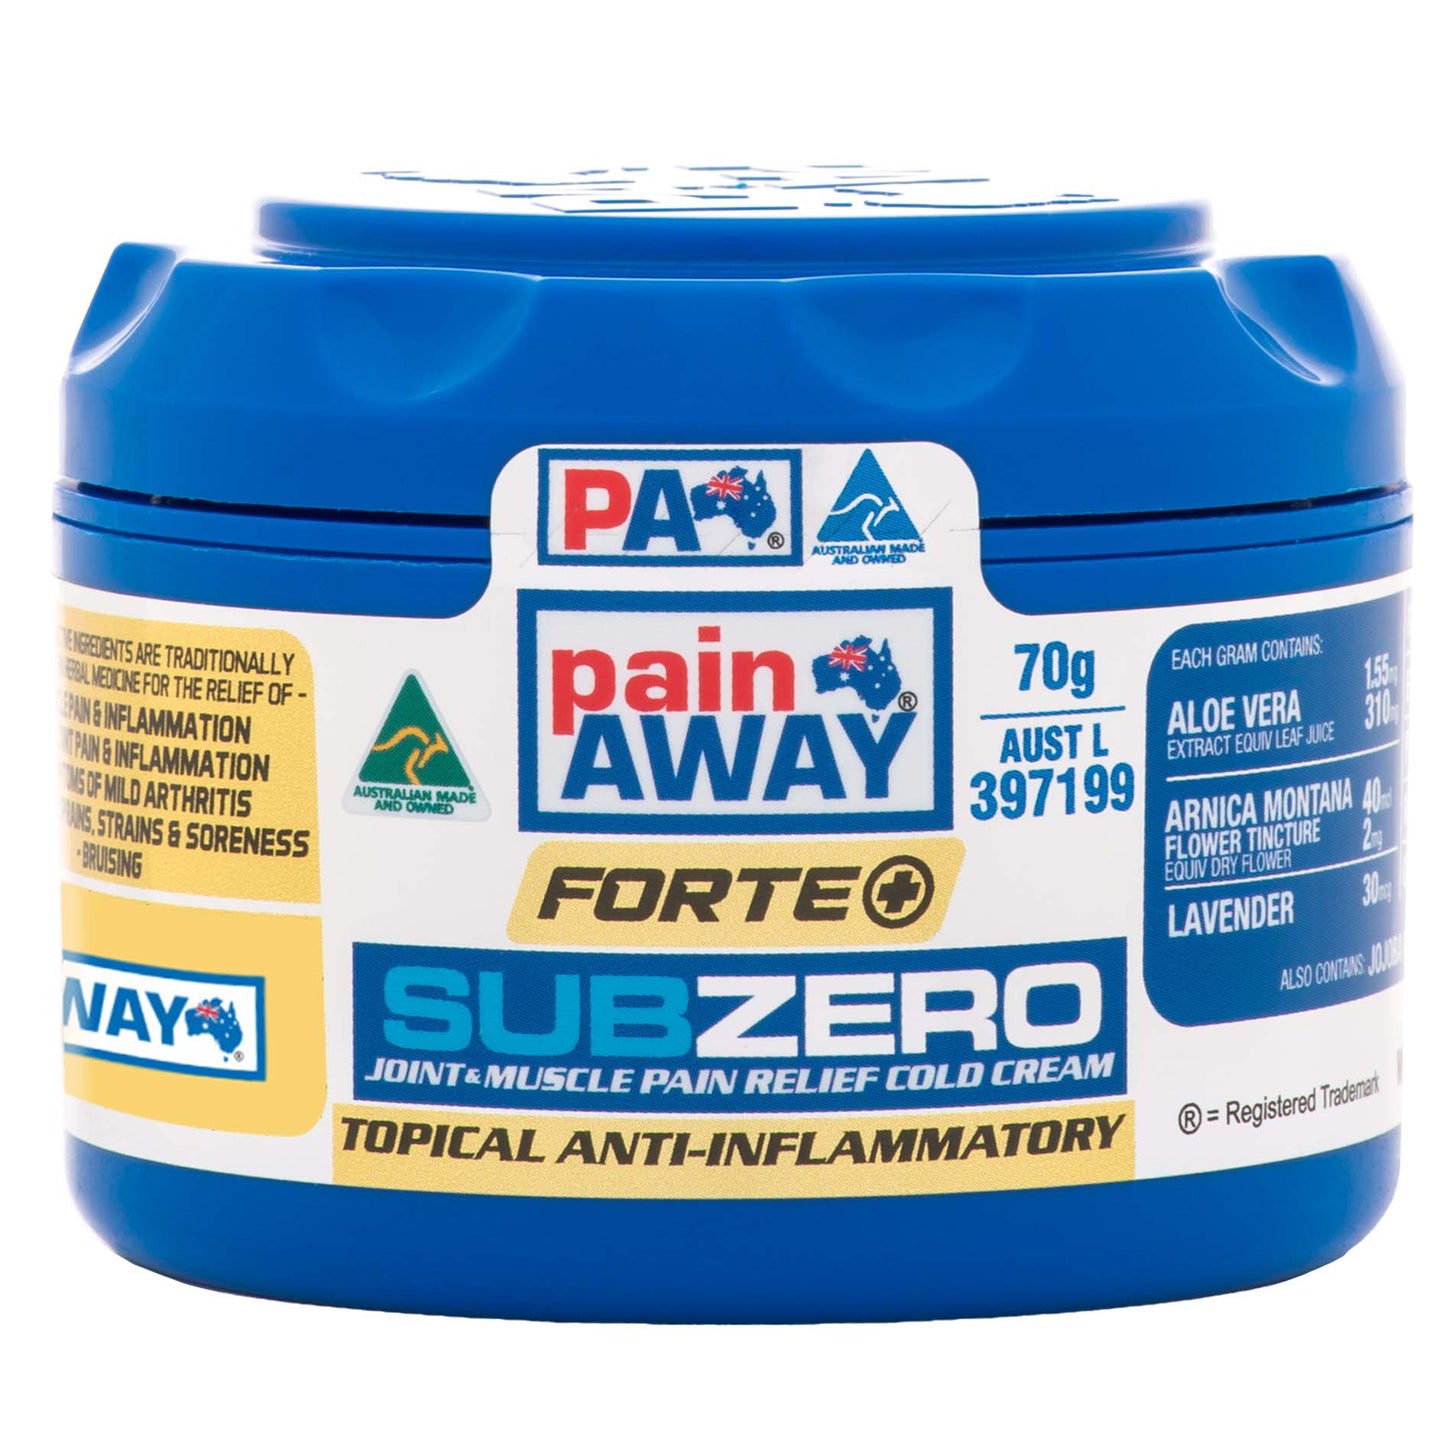 PAIN AWAY SUB ZERO JOINT & MUSCLE PAIN RELIEF COLD CREAM 70G